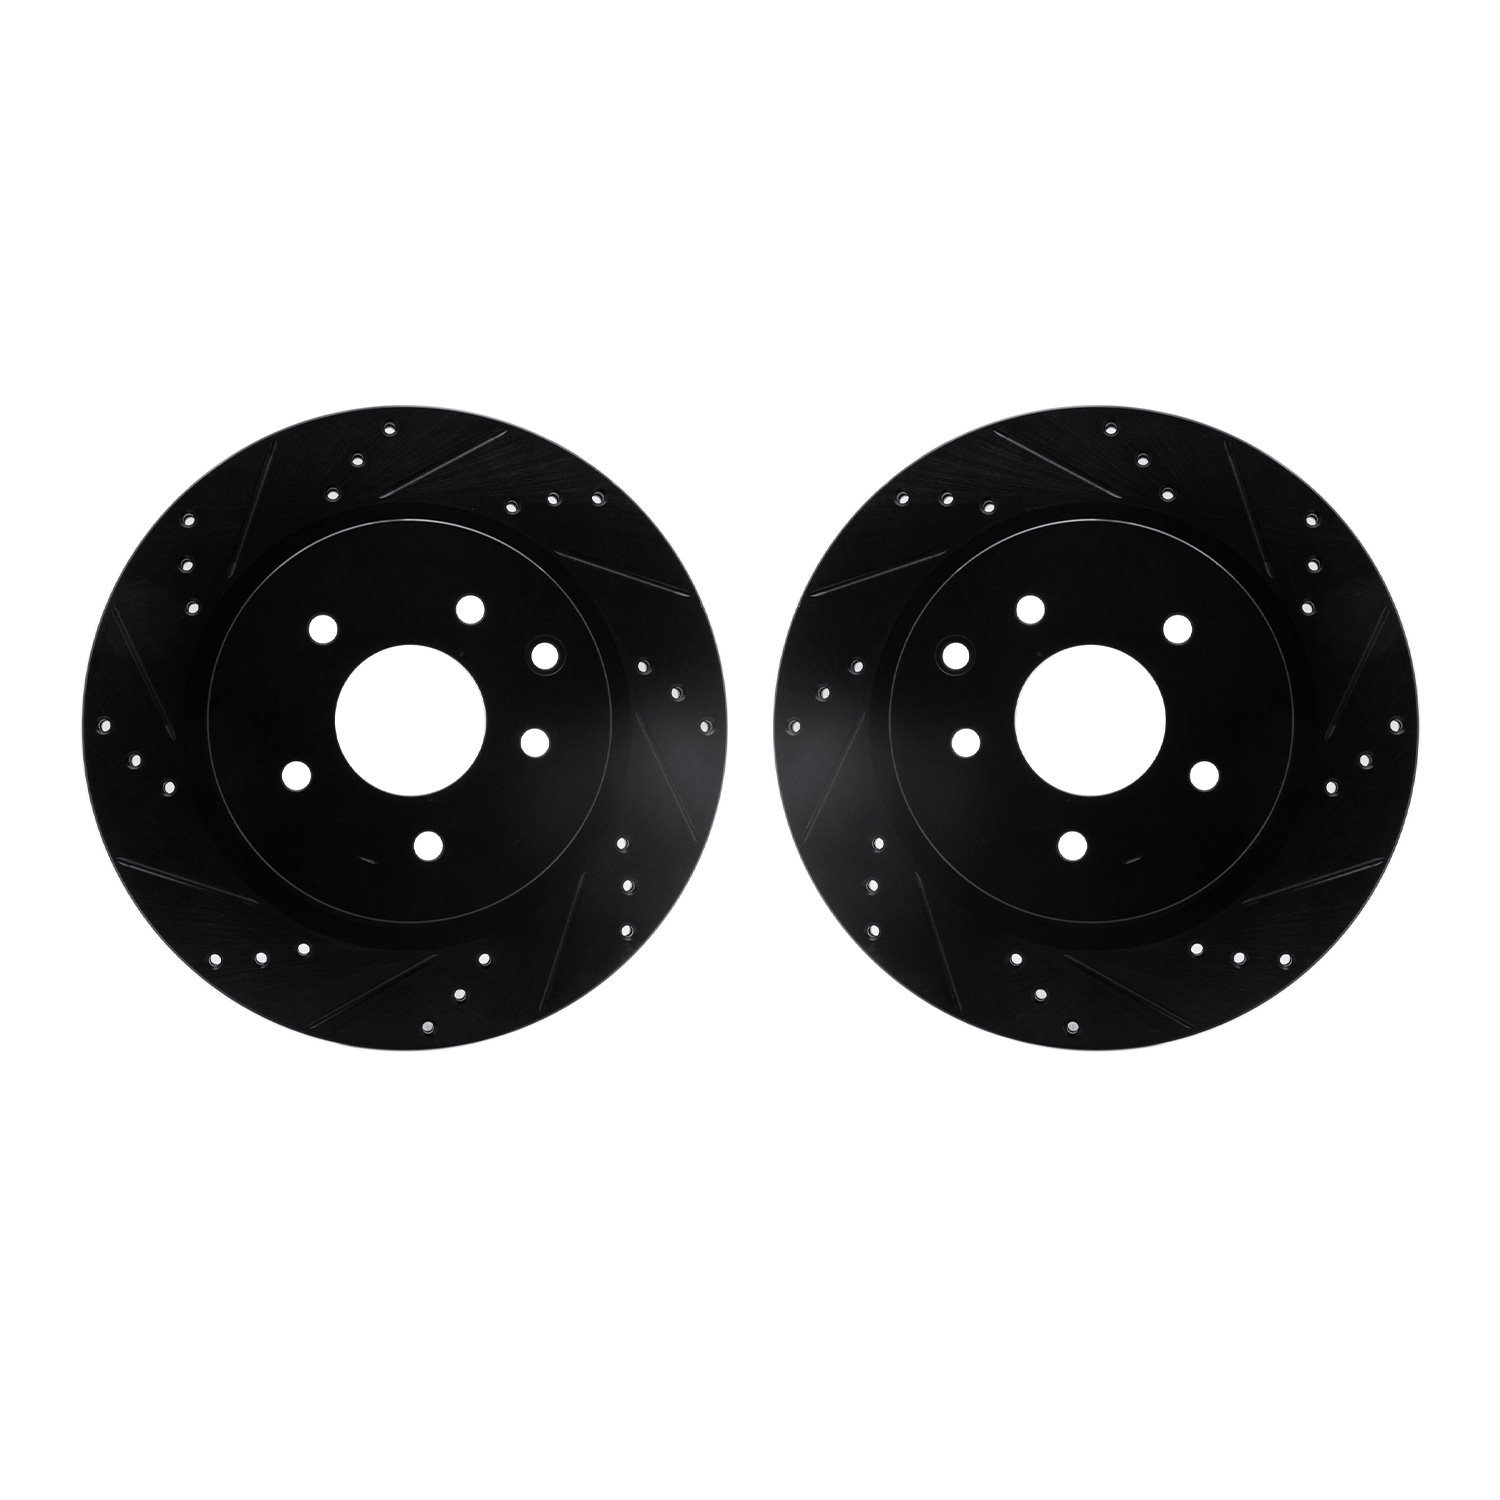 8002-67078 Drilled/Slotted Brake Rotors [Black], Fits Select Infiniti/Nissan, Position: Rear